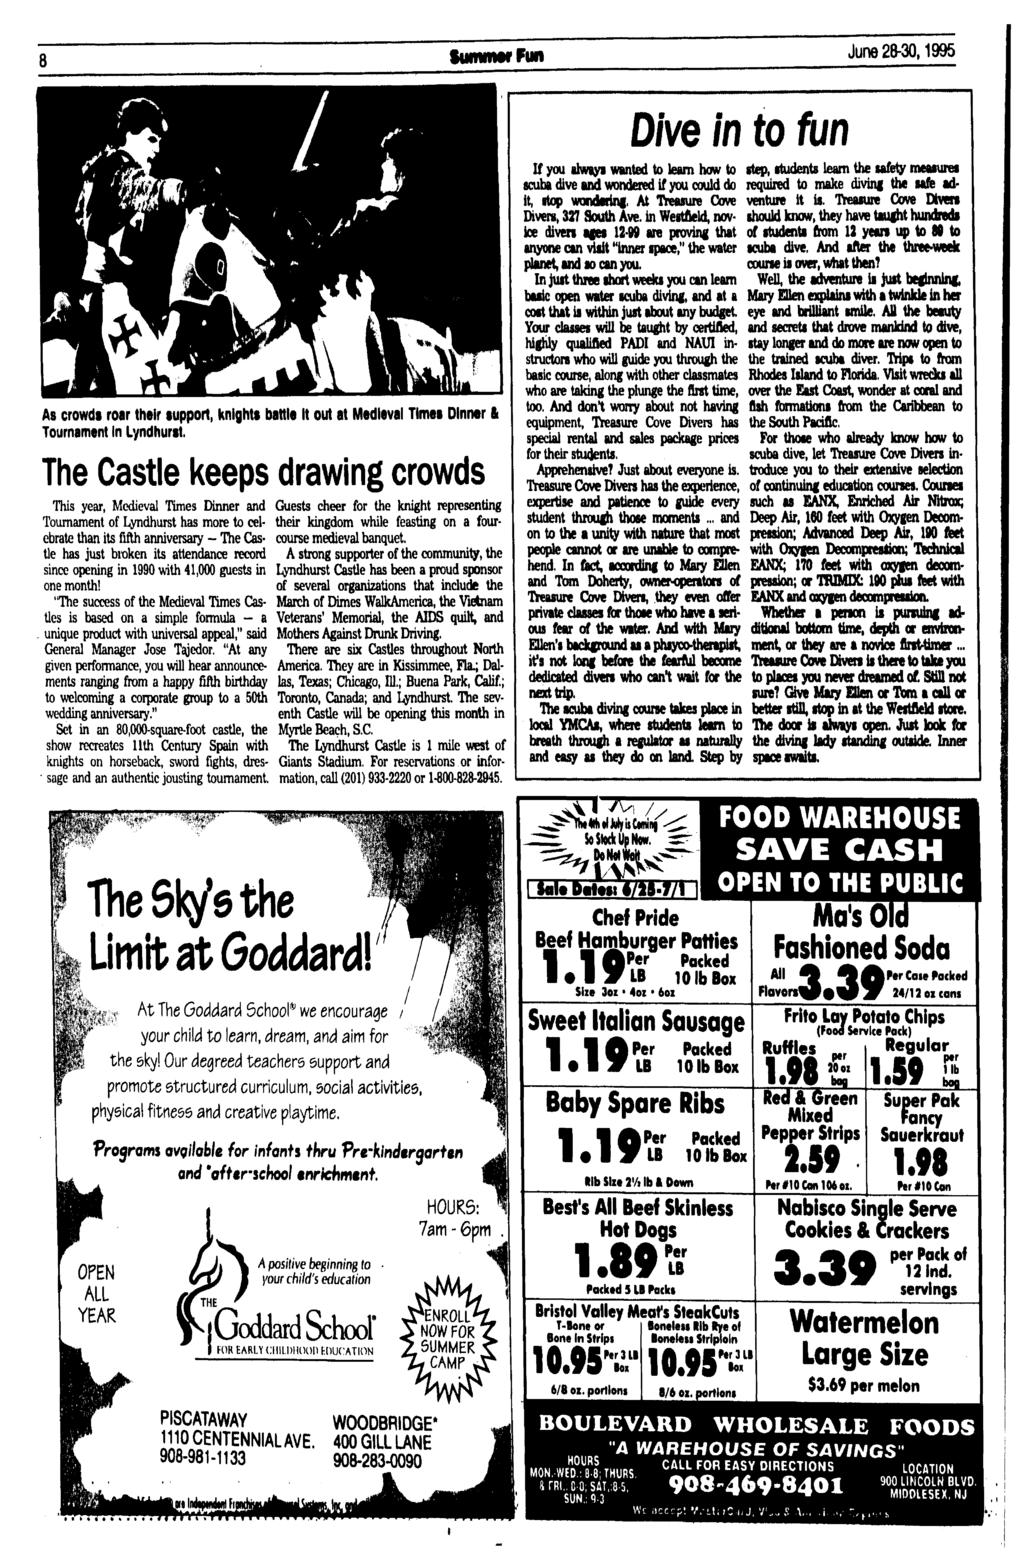 Summer Fun June 28-30,1995 Dive in to fun As crowds roar their support, knights battle t out at Medieval Times Dinner & Tournament n Lyndhurst.